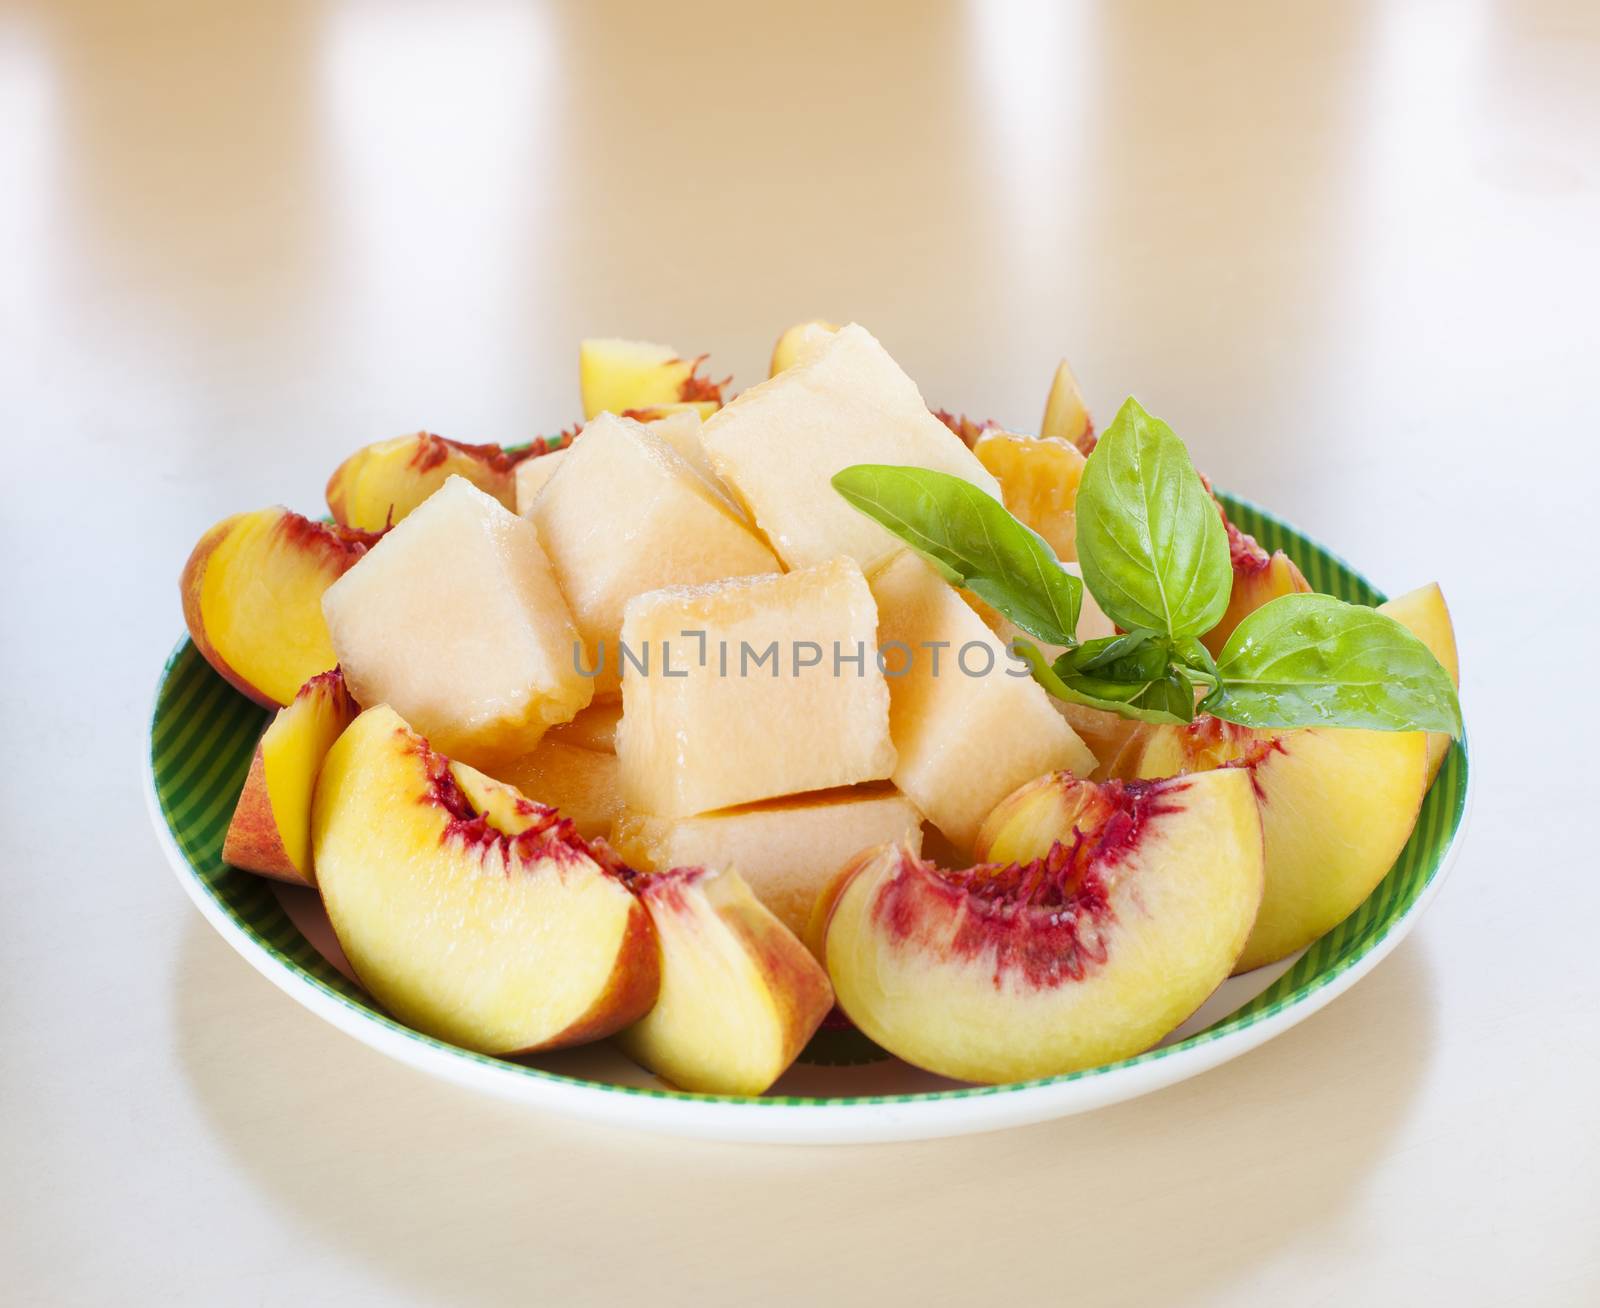 Plate with sliced fruits - peaches and melon with fresh basil.